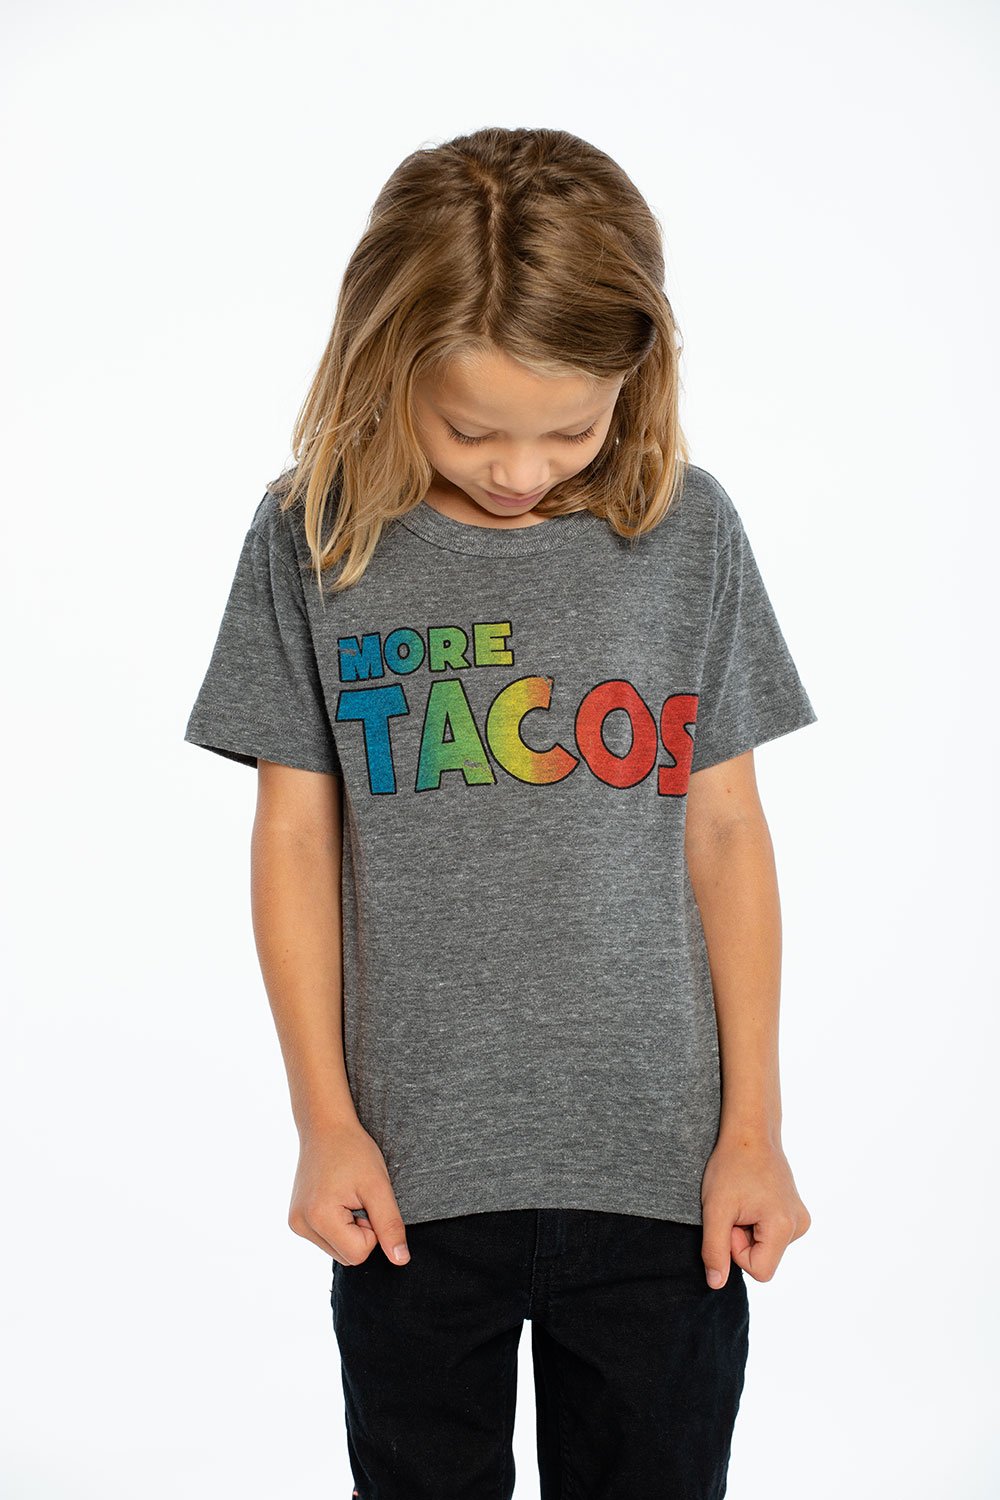 More Tacos Chaser Brand Tee, $33-.jpg